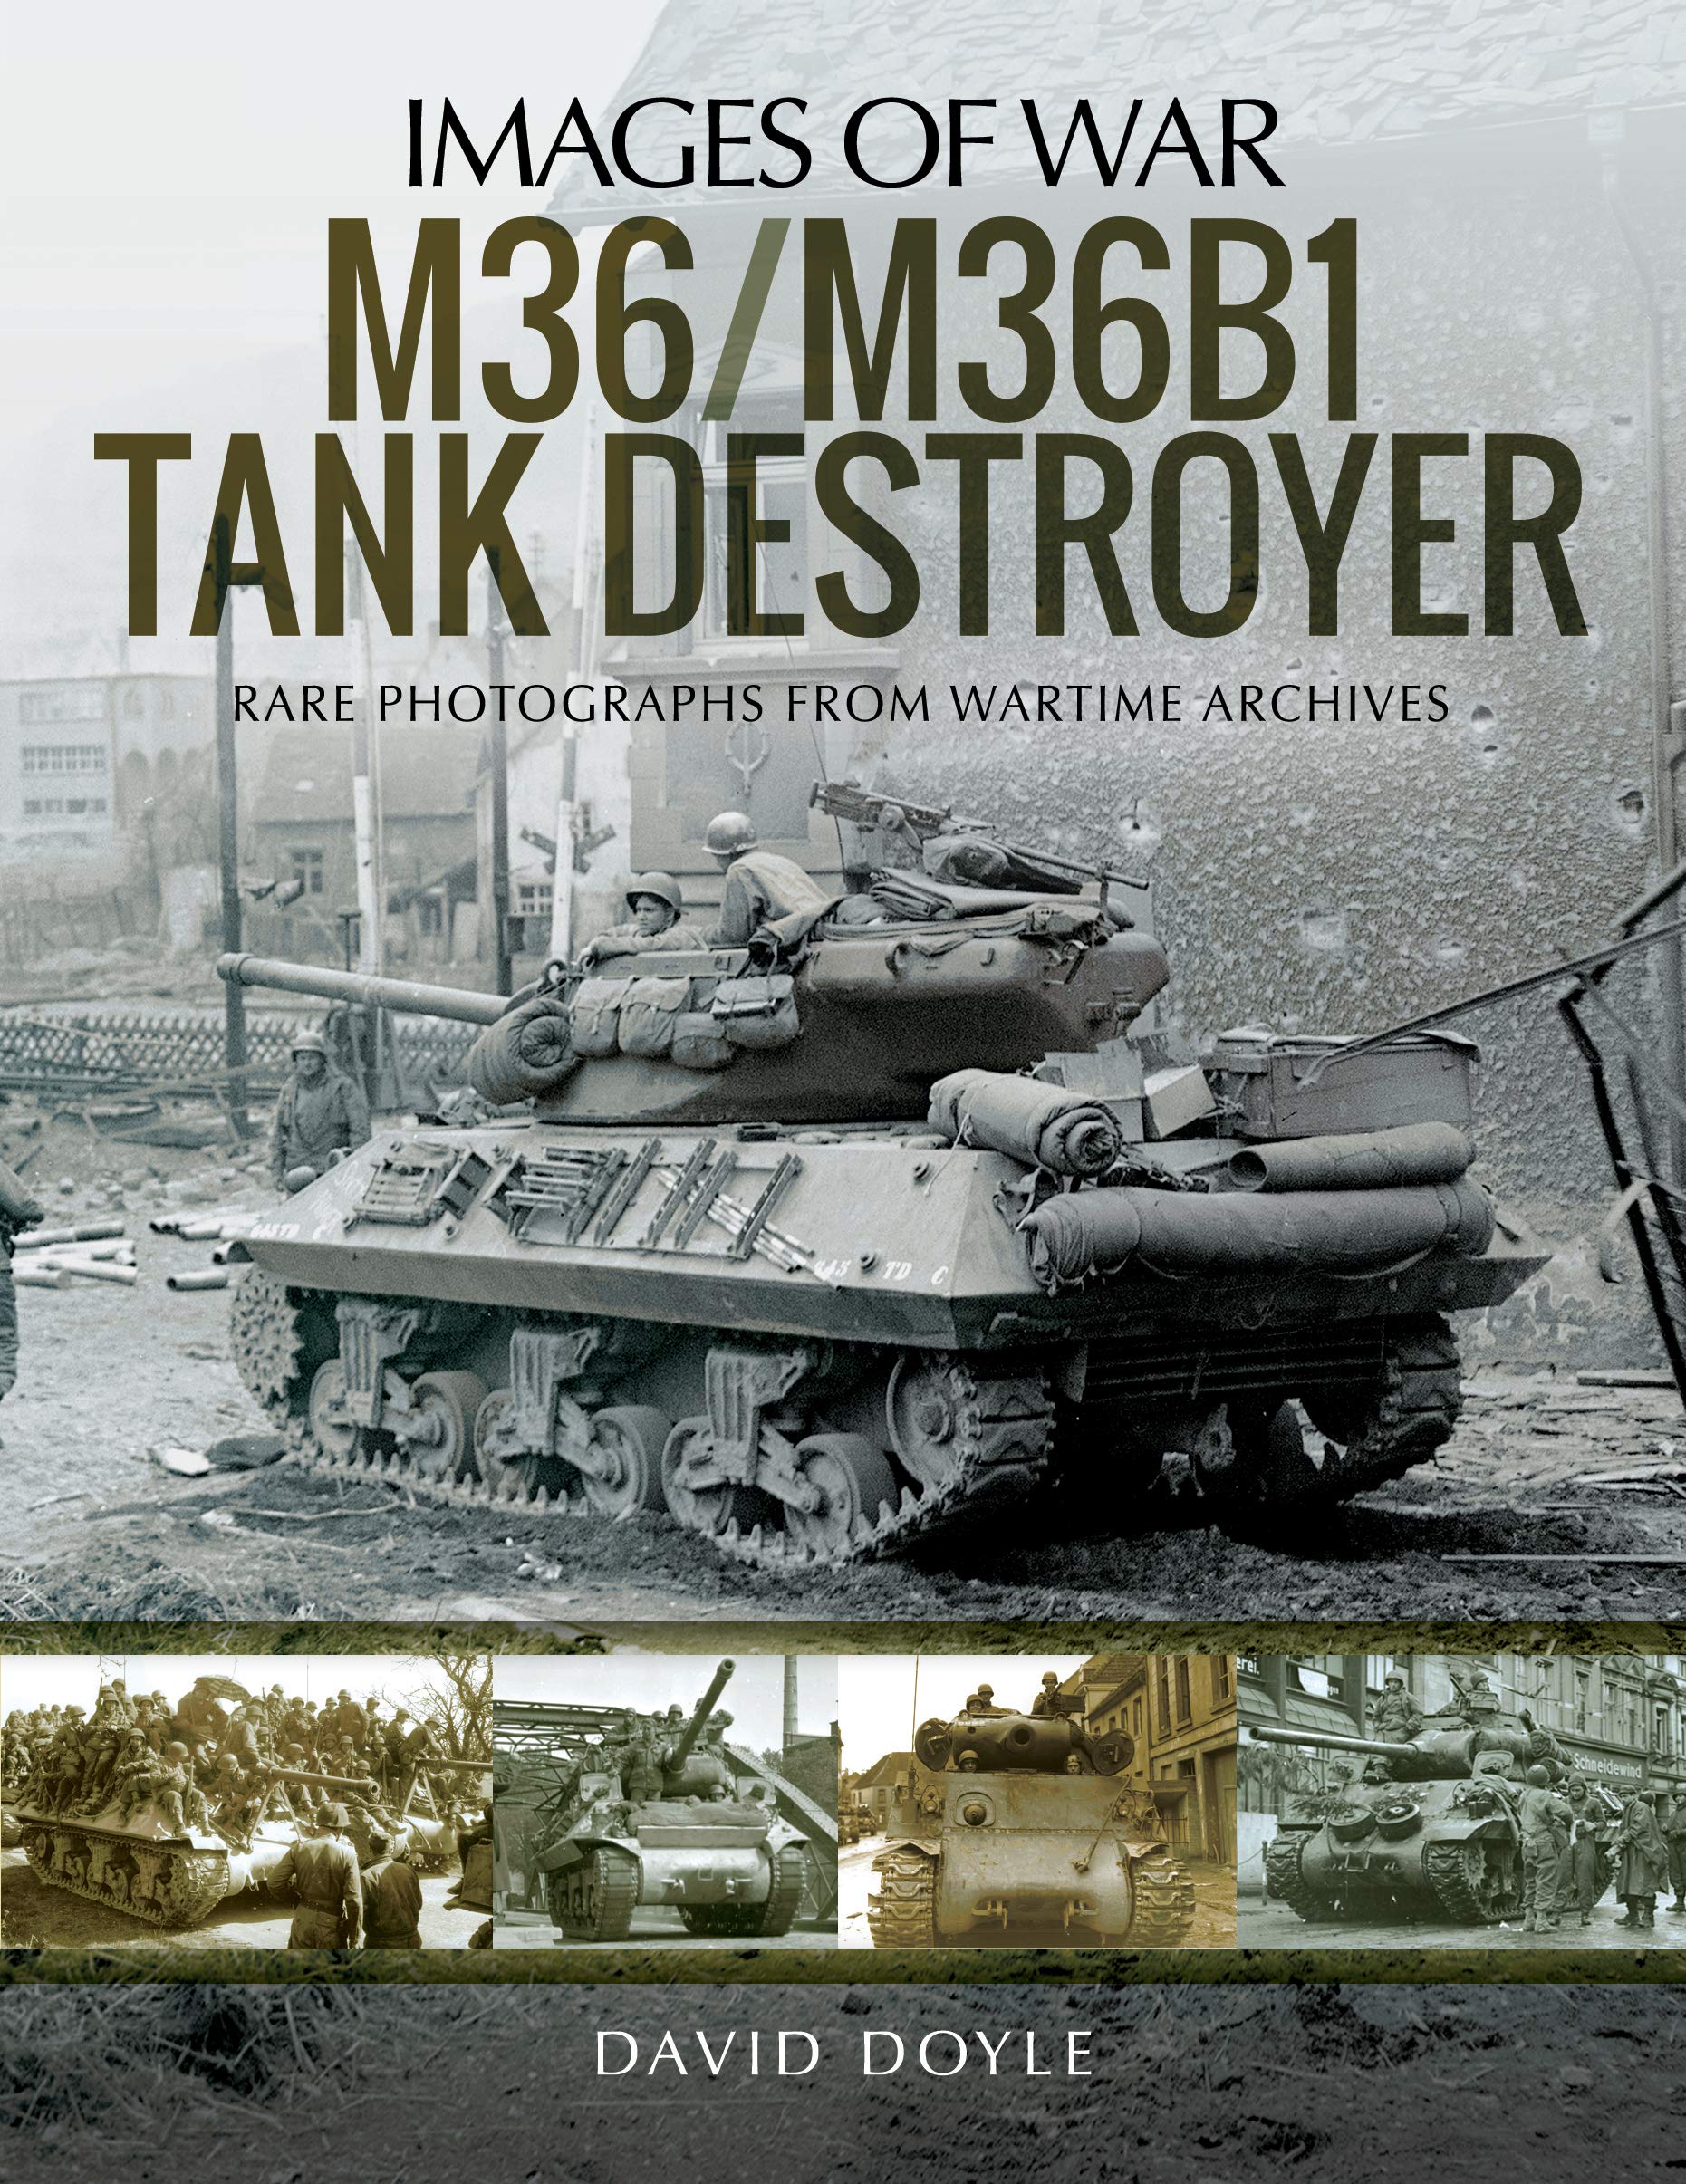 M10 Tank Destroyer Wallpapers